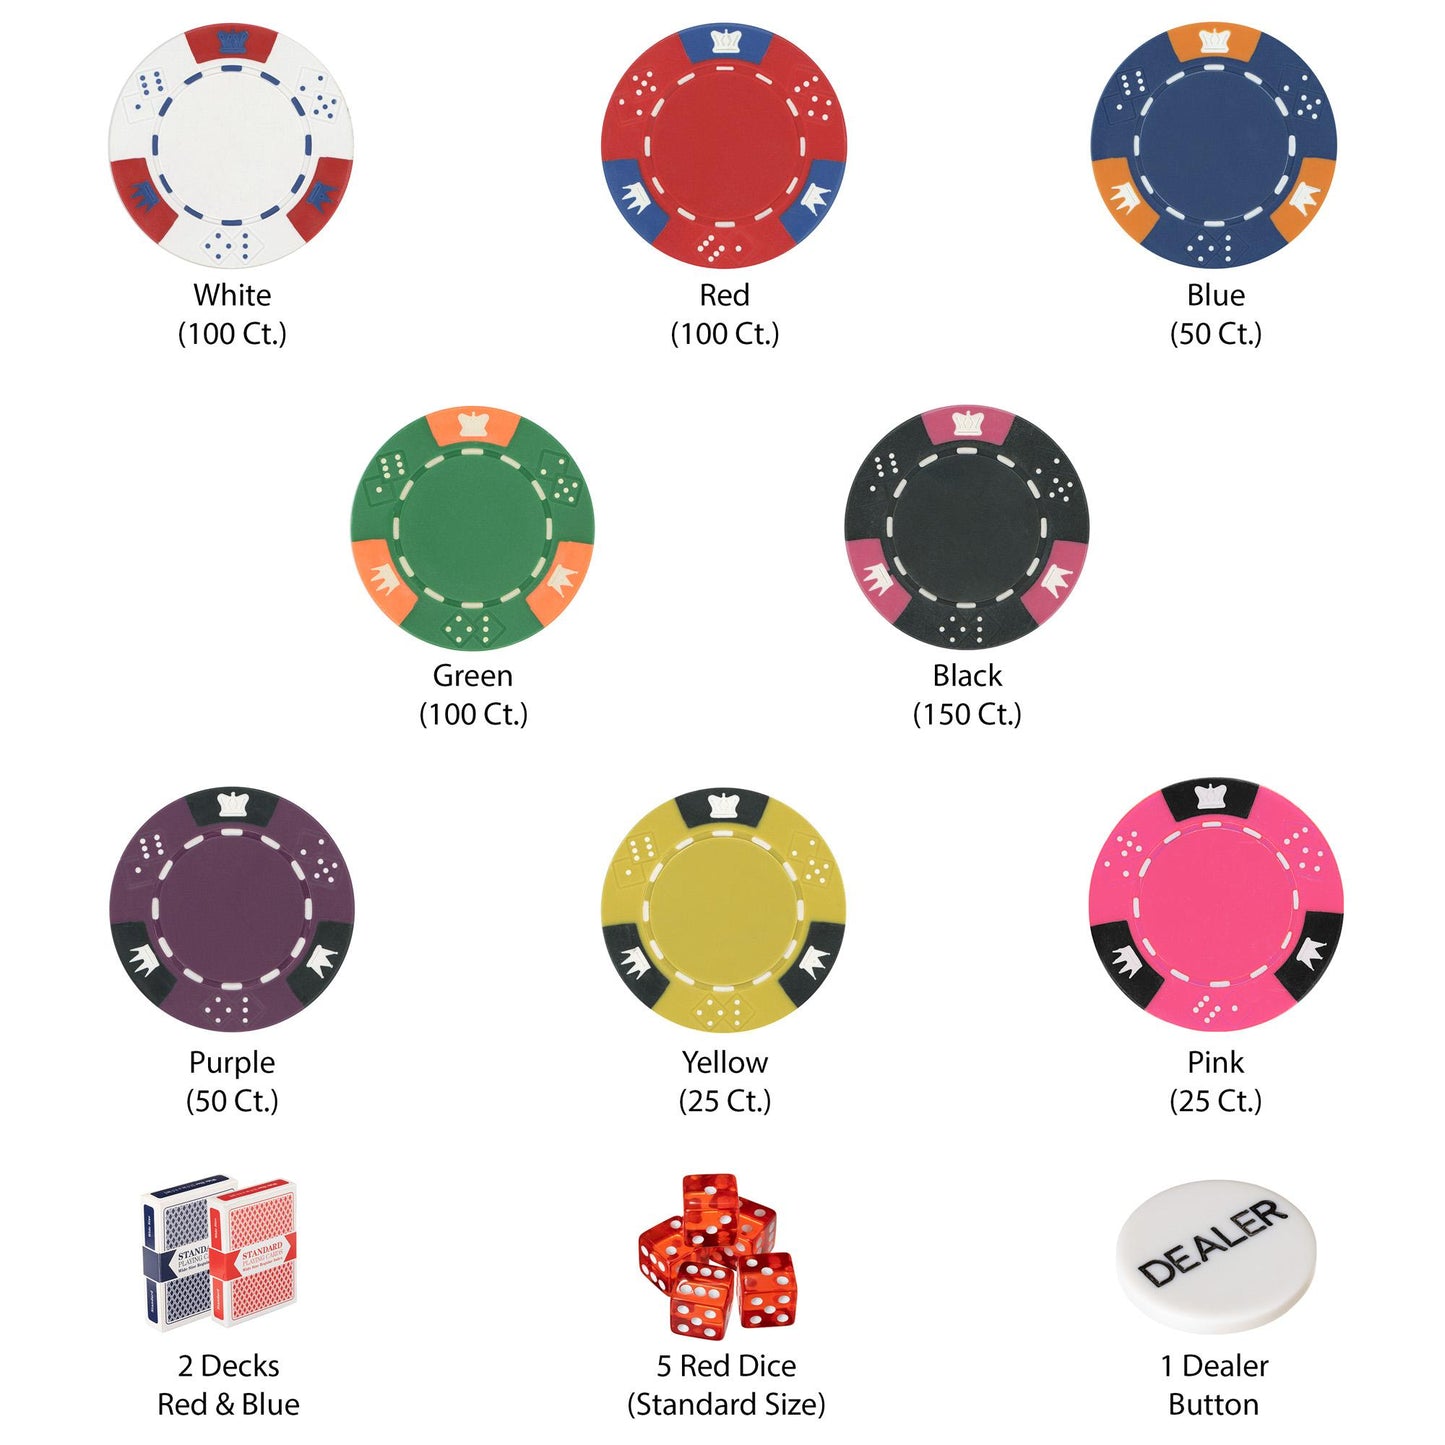 600 Crown and Dice Poker Chips with Aluminum Case